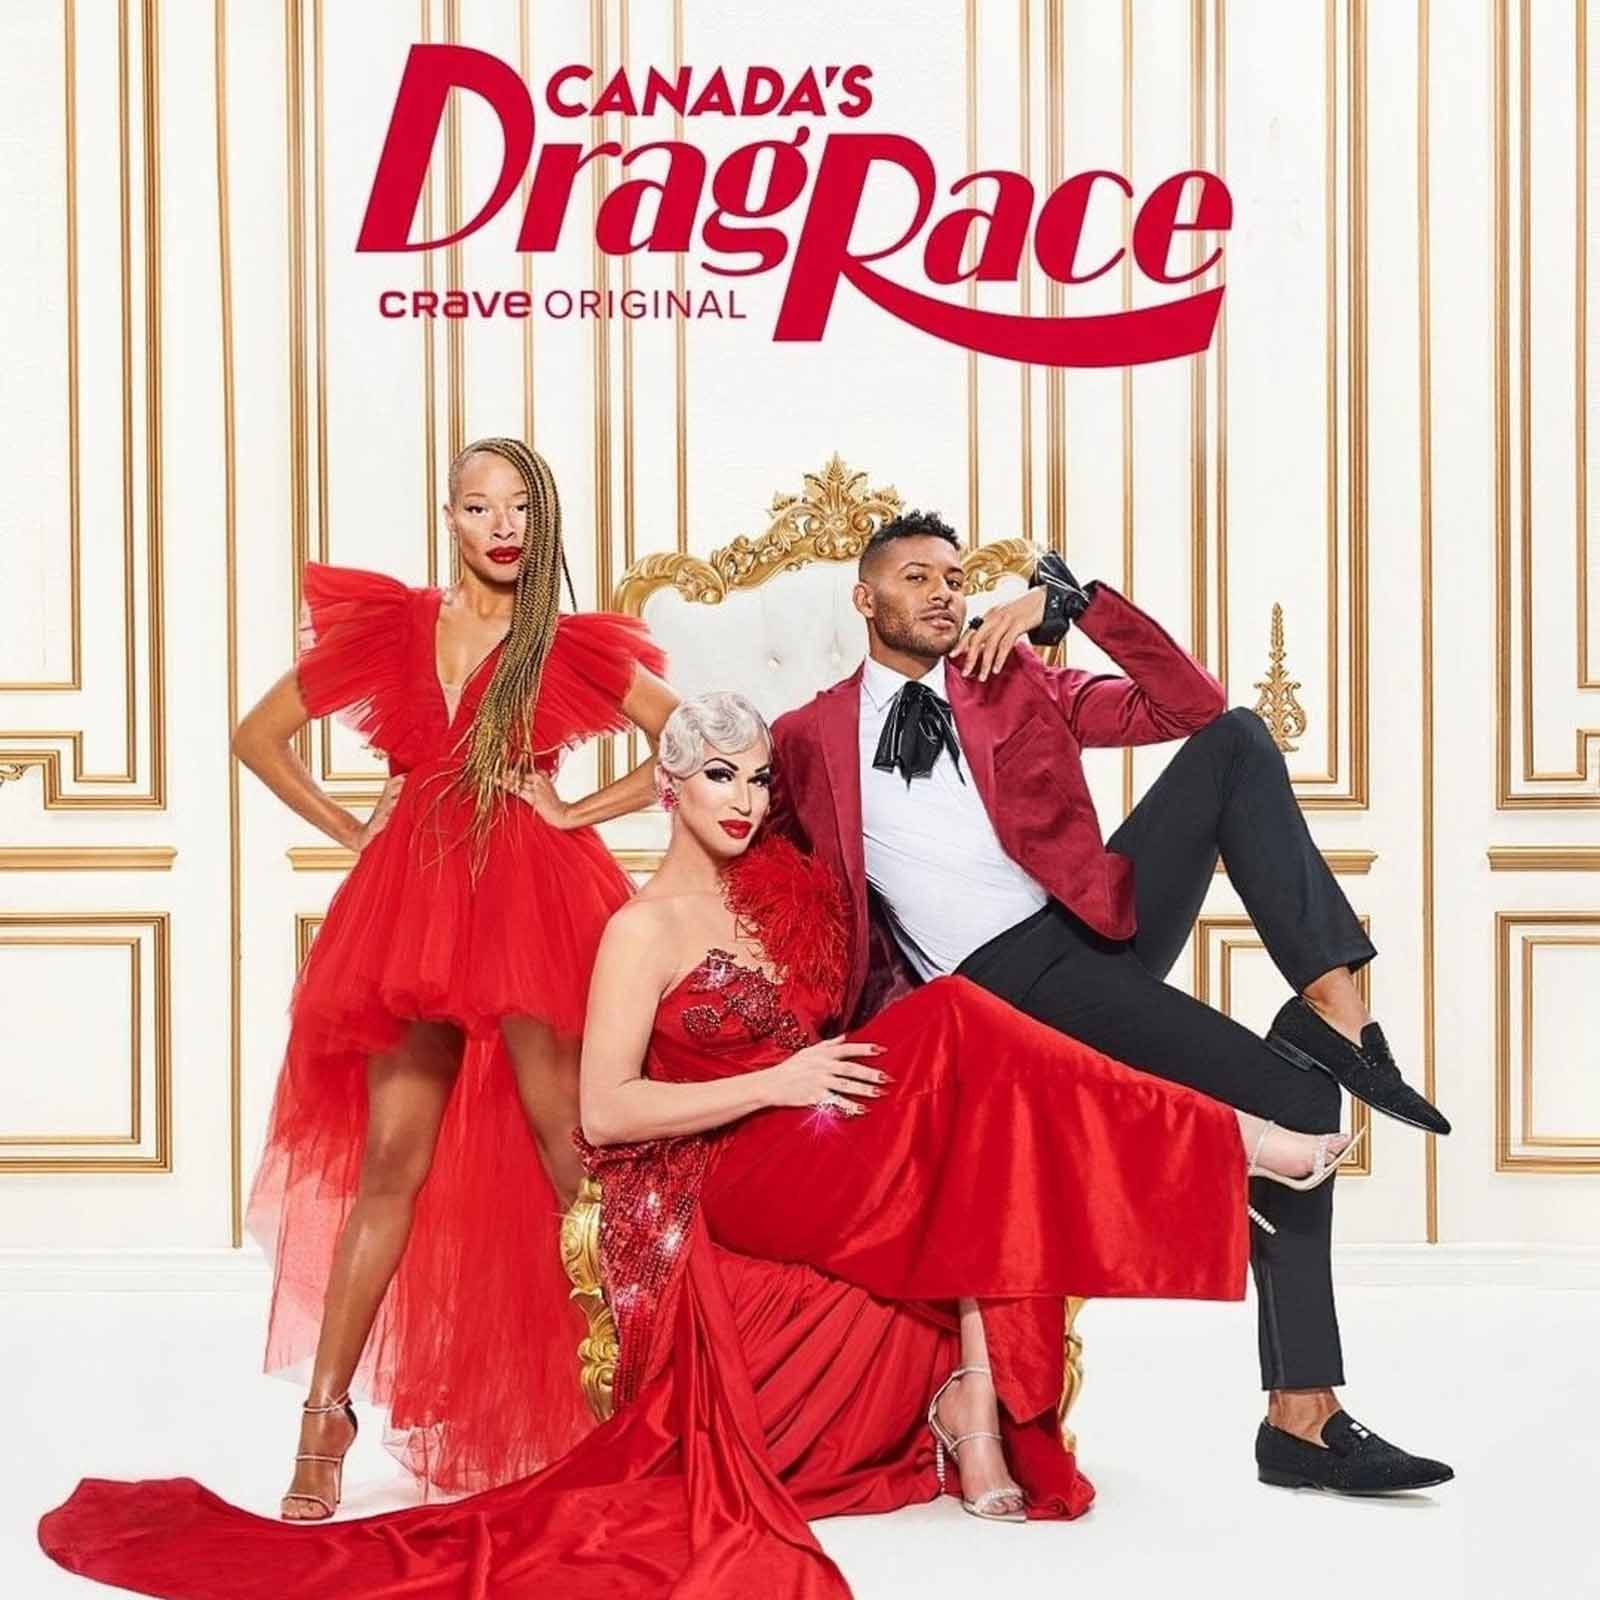 'Canada's Drag Race' has finally brought us the Canadian queens we've been waiting for. Get to know the new 'Drag Race' series and catch up.